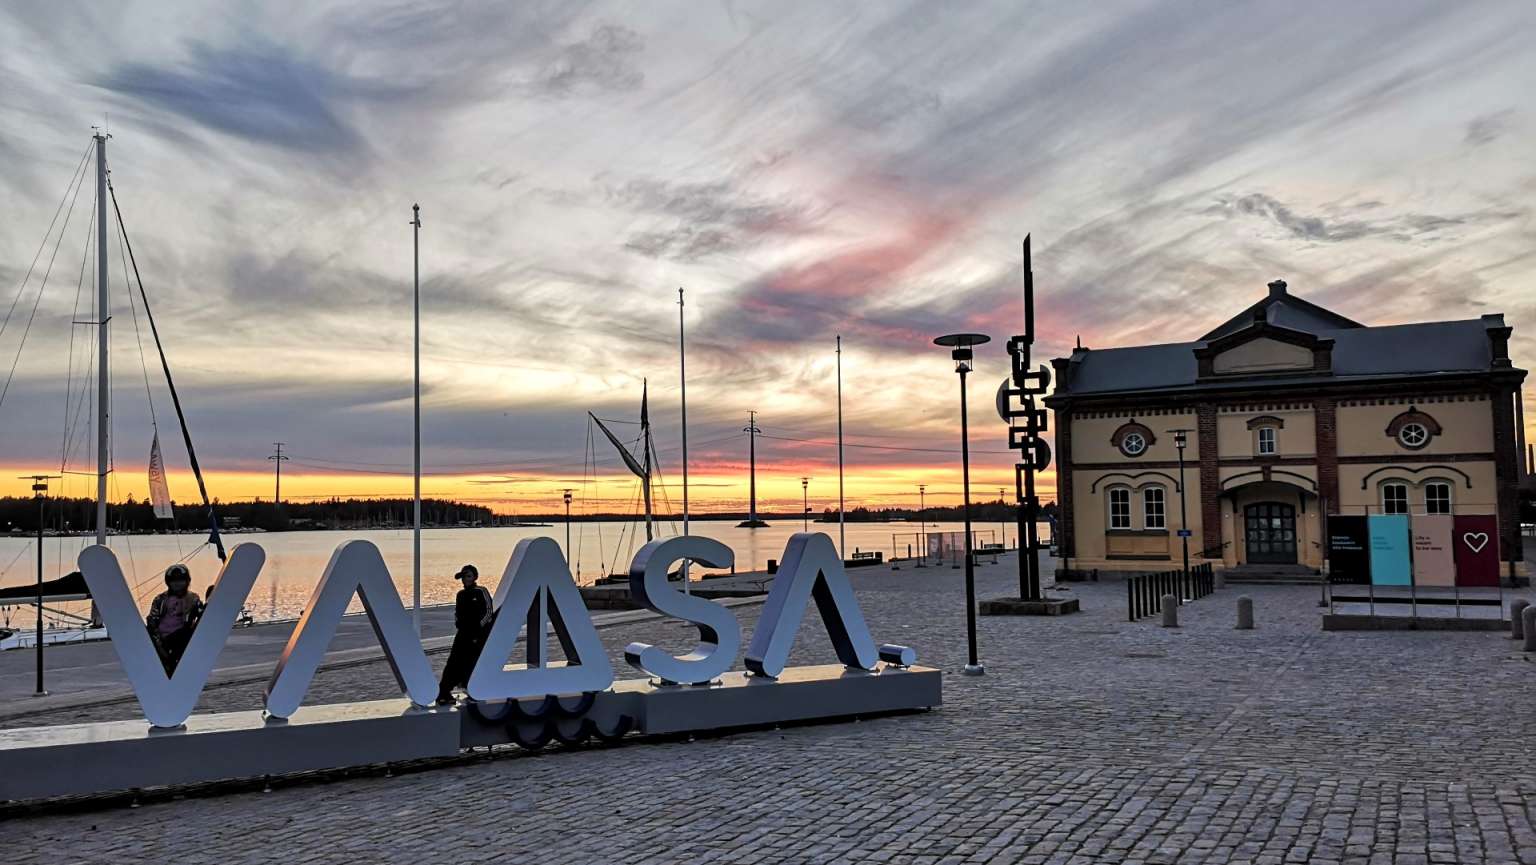 places to visit in vaasa finland